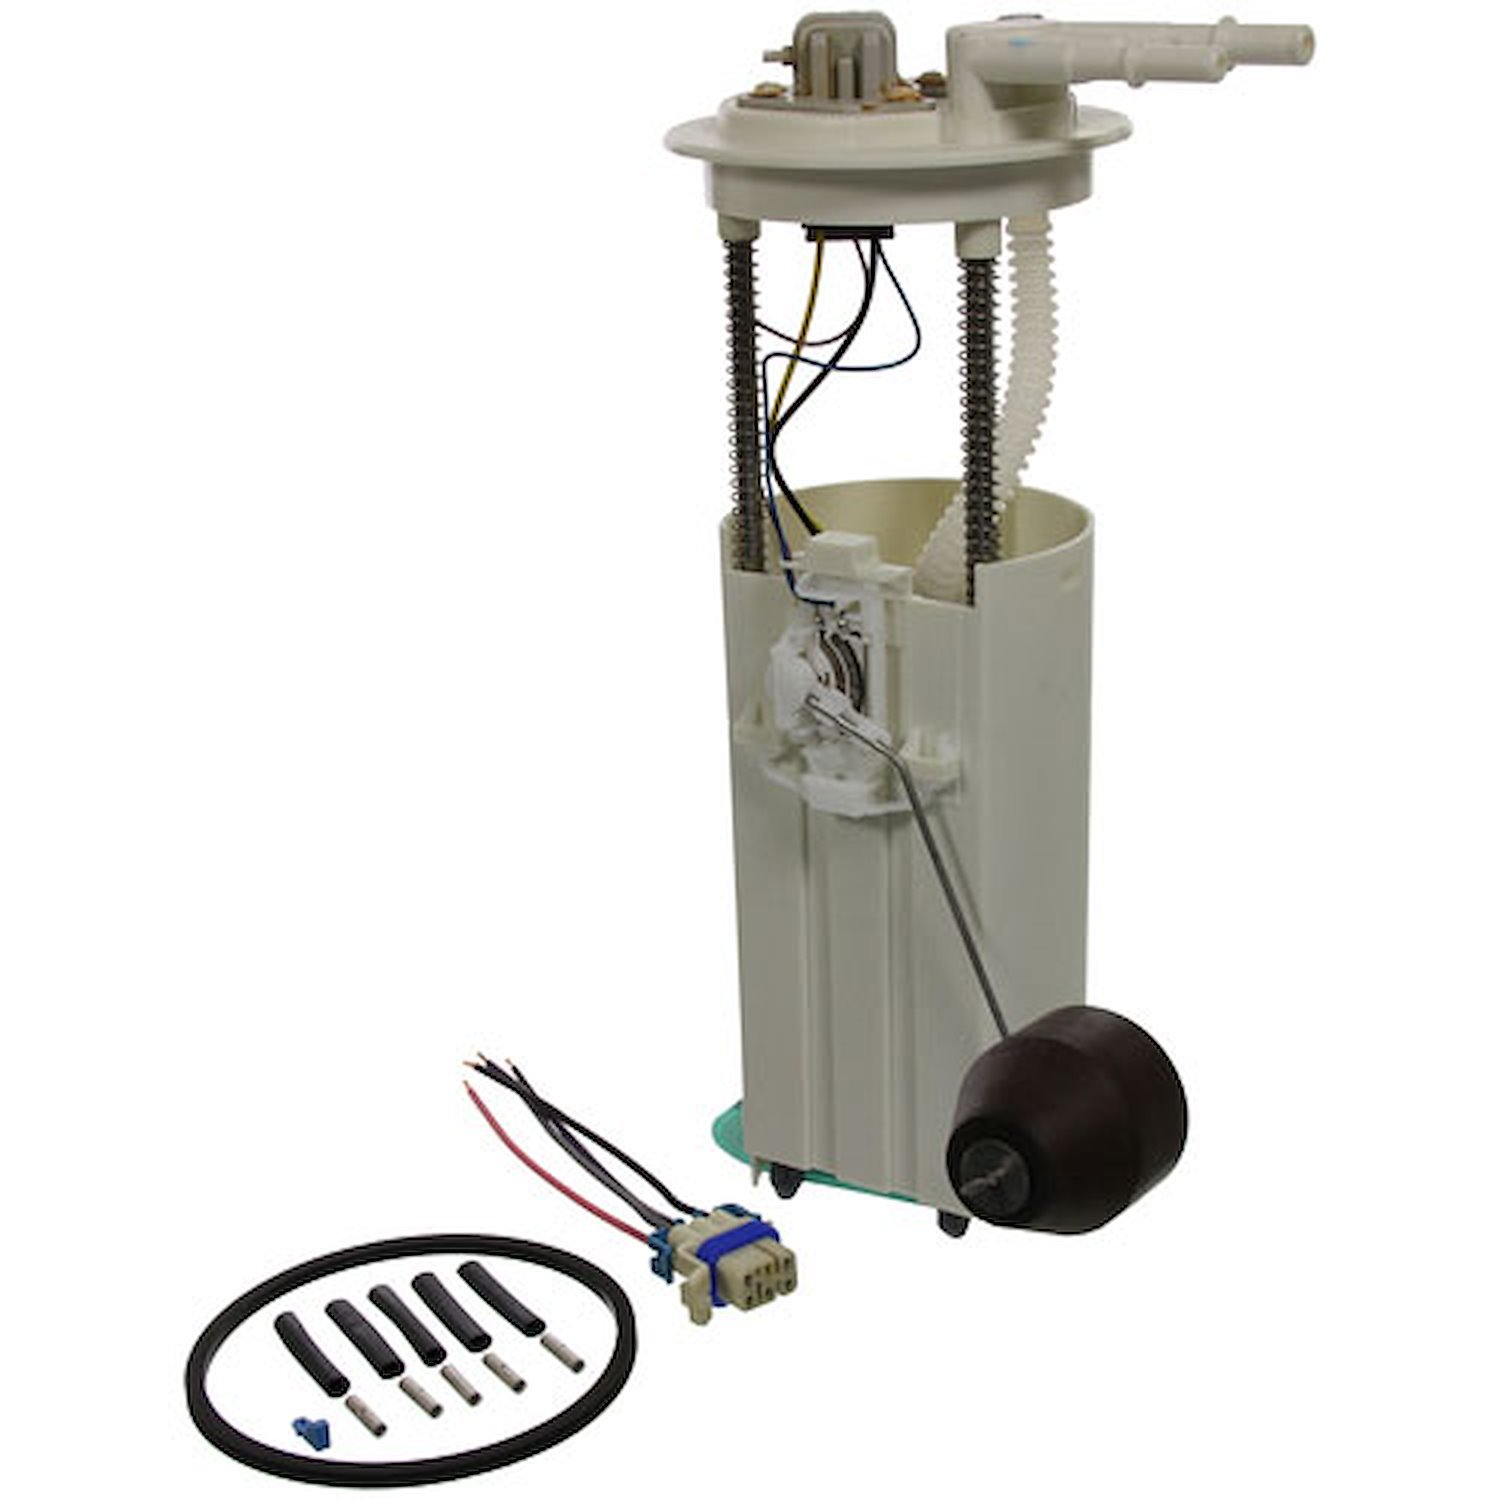 OE GM Replacement Electric Fuel Pump Module Assembly 1997 Buick Park Ave/Riviera 231cid 3.8L V6